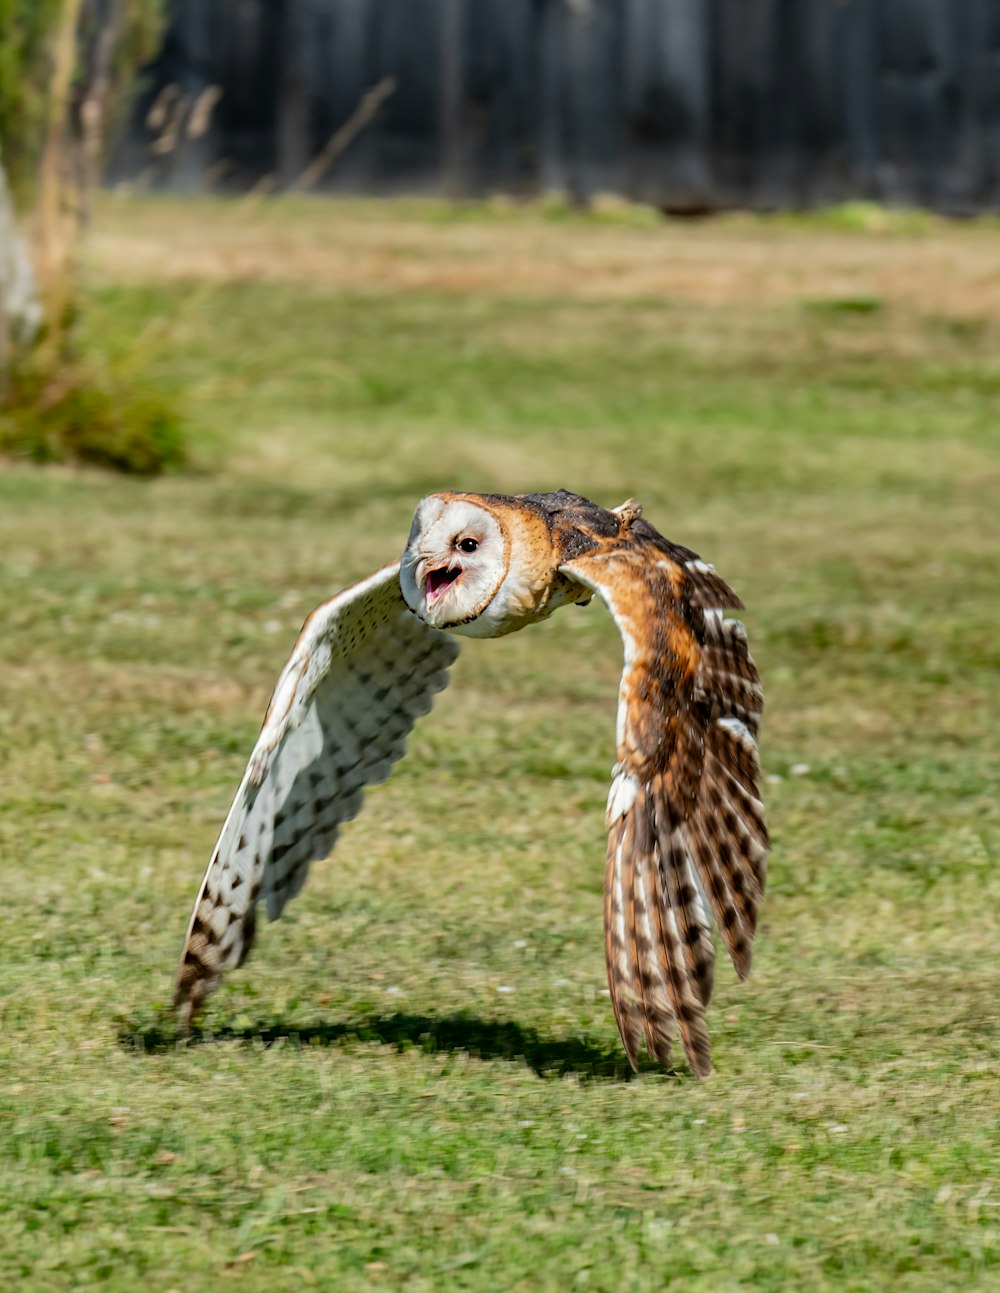 an owl is flying in the air over the grass